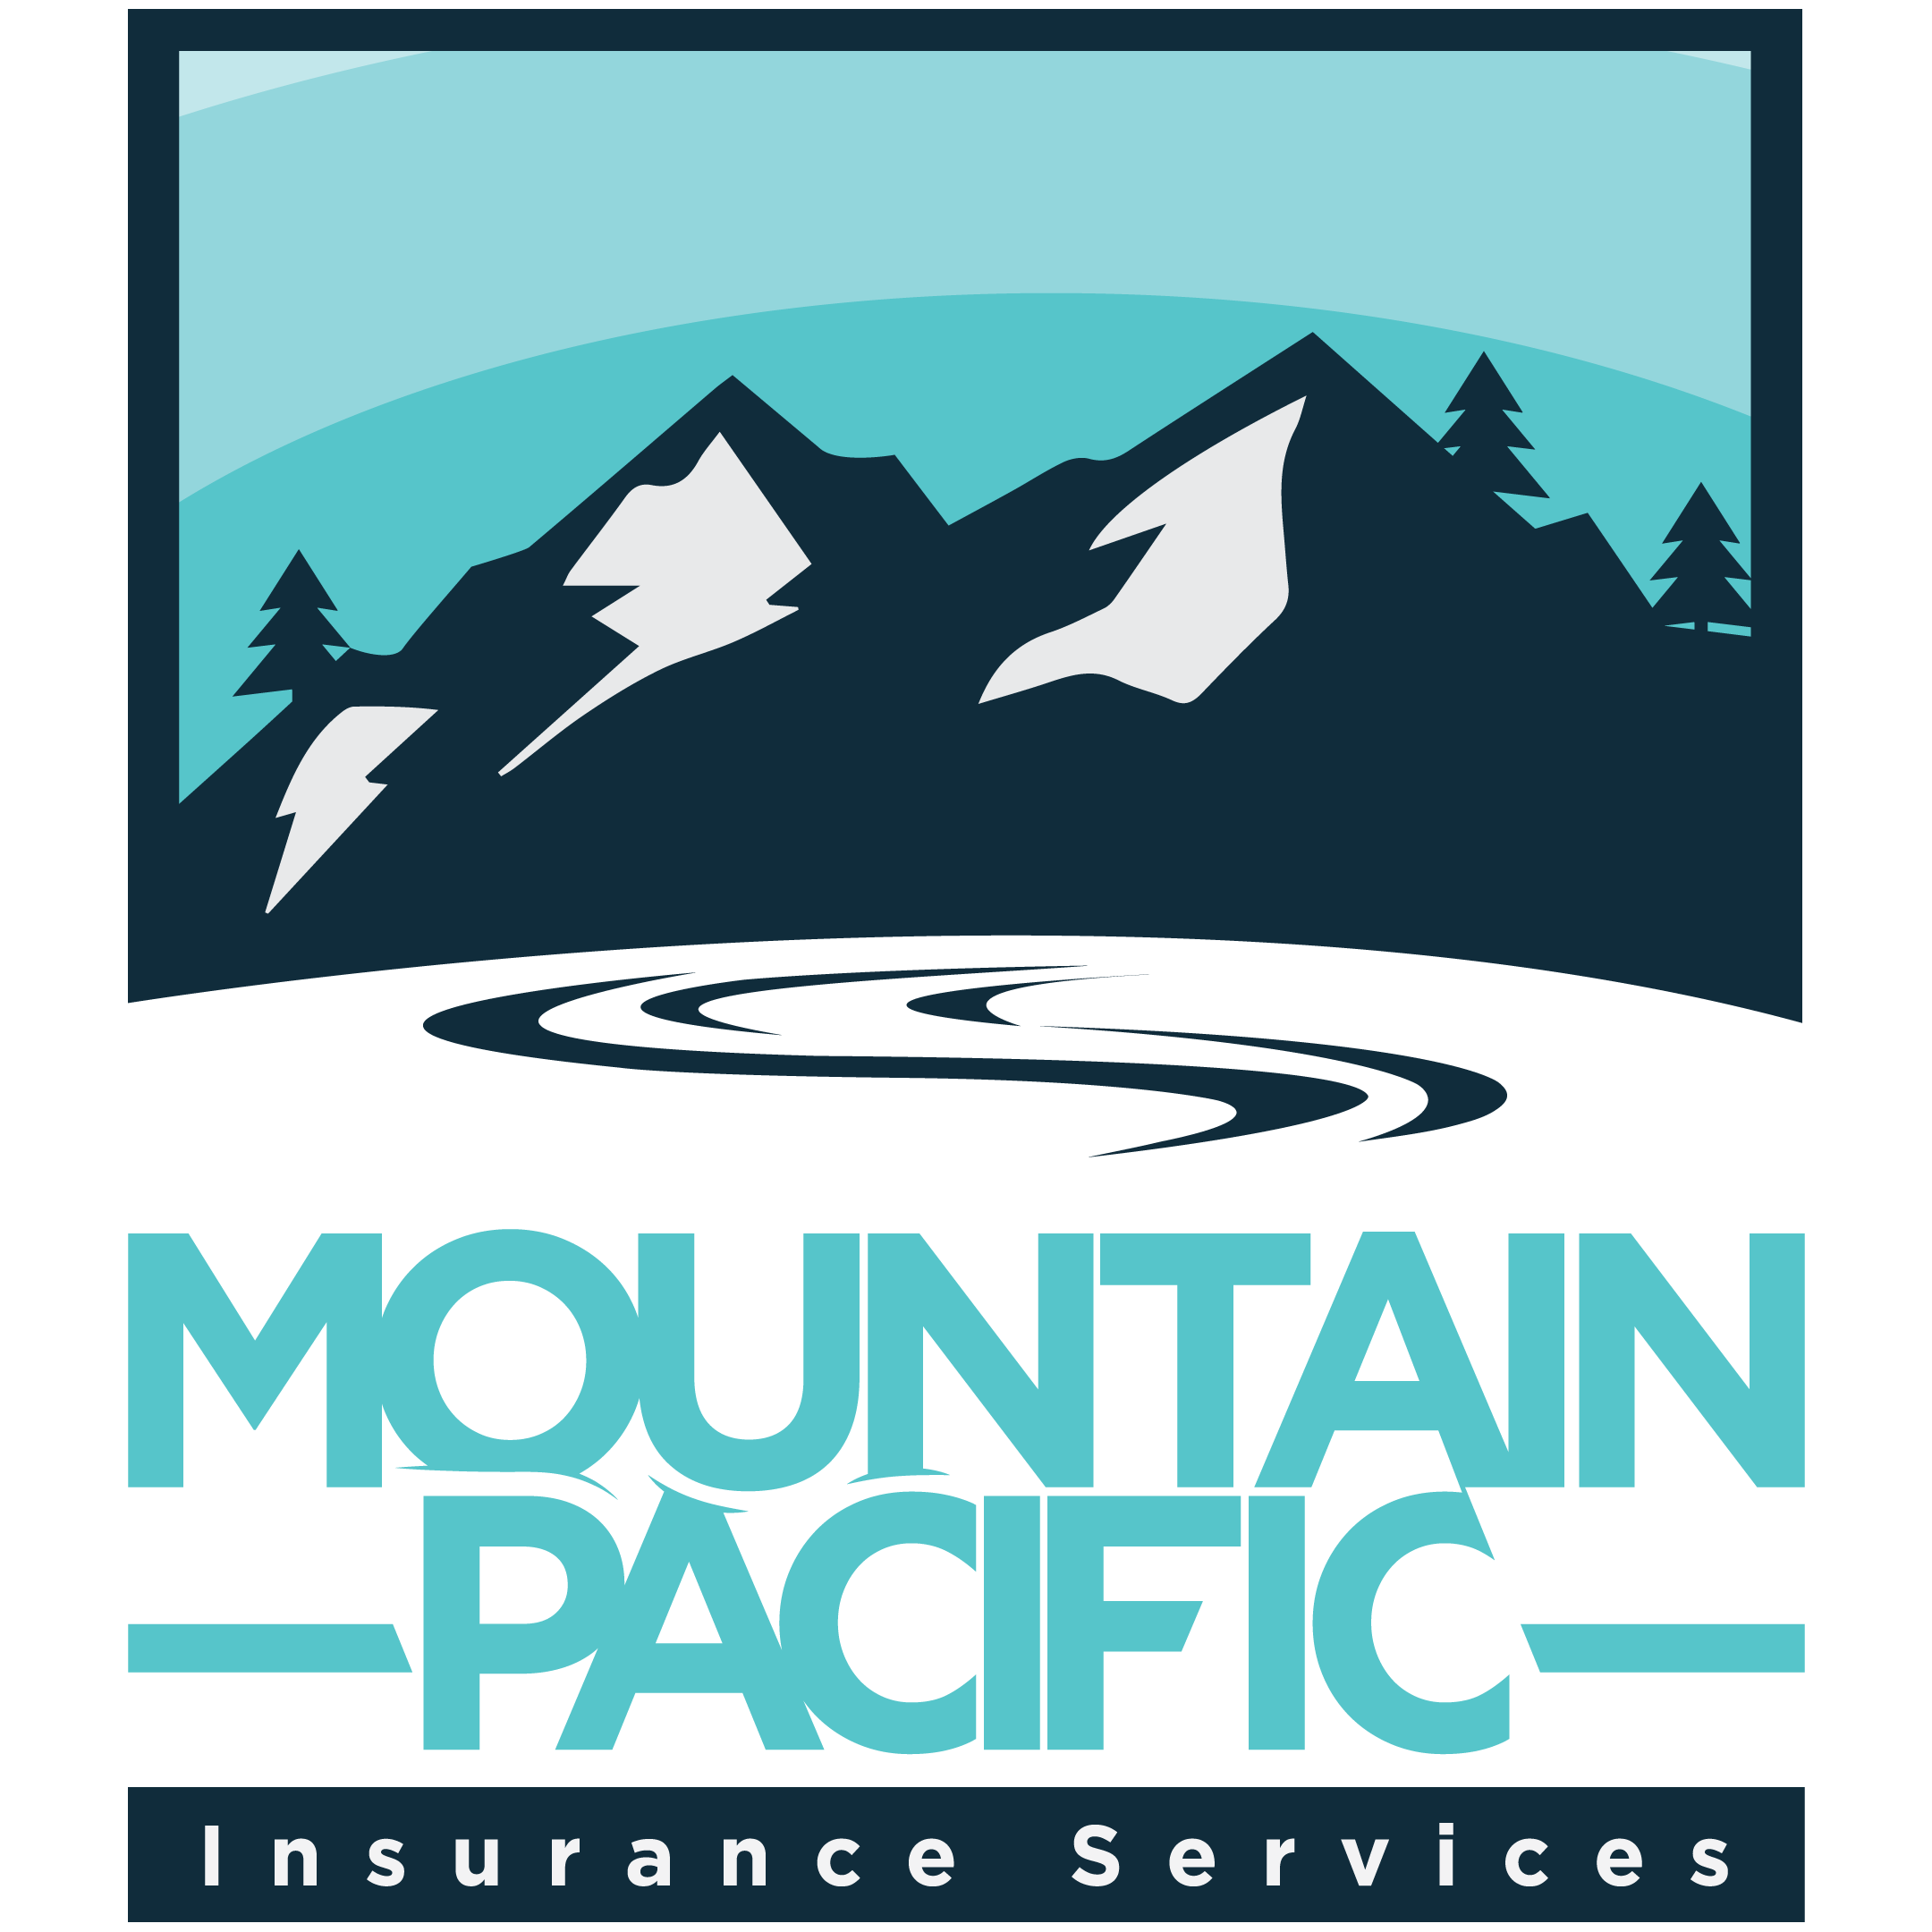 Nationwide Insurance: Mountain Pacific Insurance Services - Bakersfield, CA 93305 - (661)633-9901 | ShowMeLocal.com